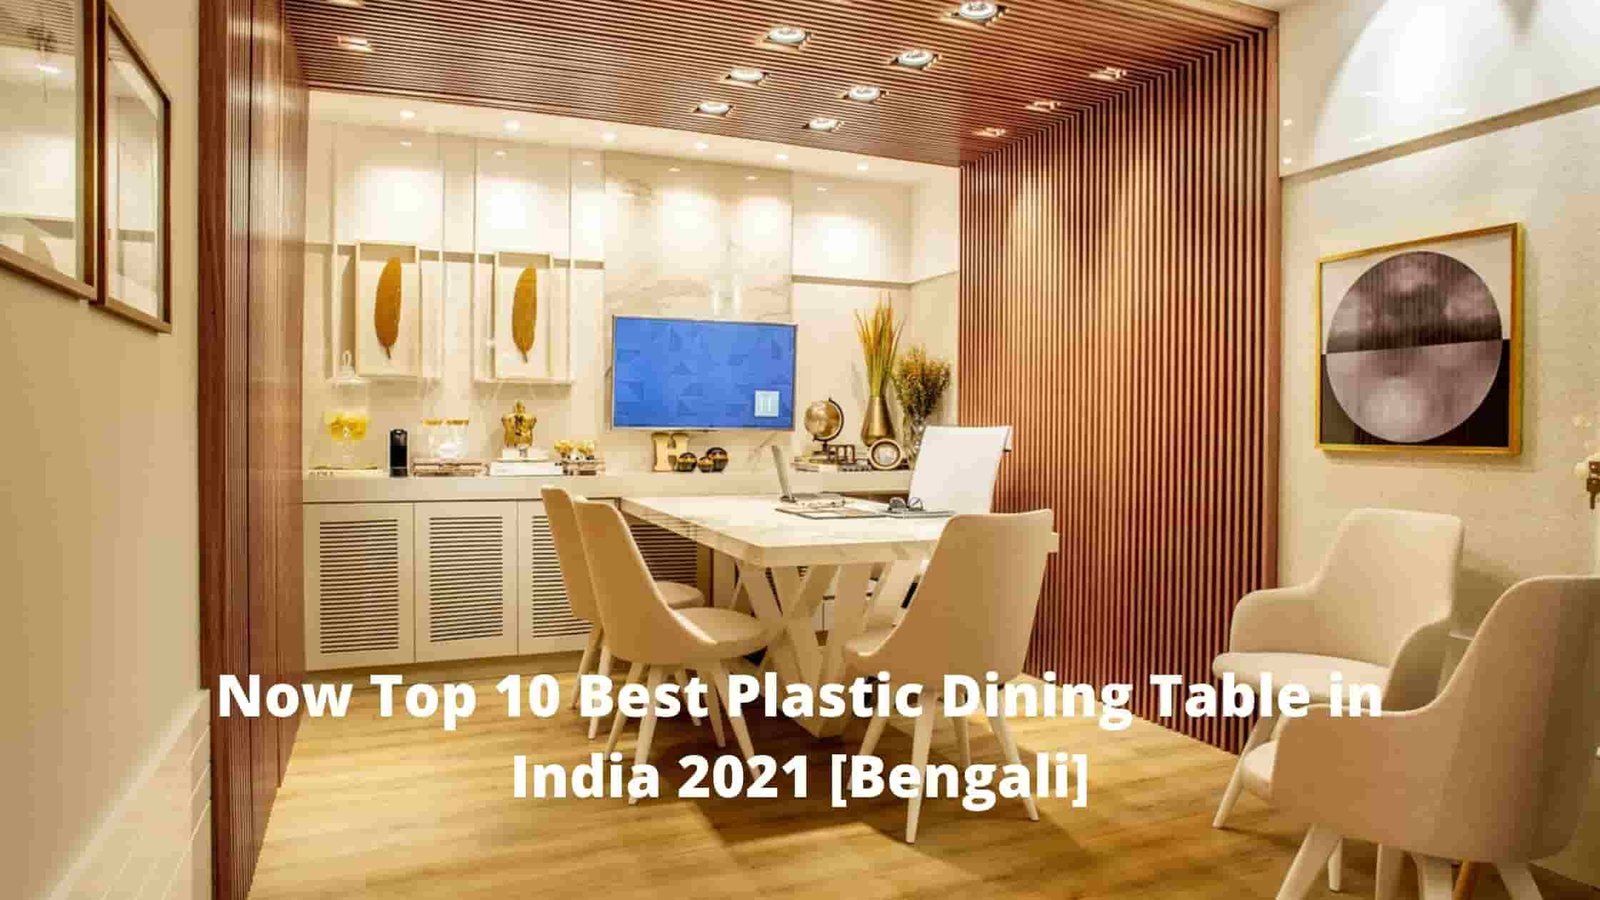 Now Top 10 Best Plastic Dining Table in India 2021 [Bengali]